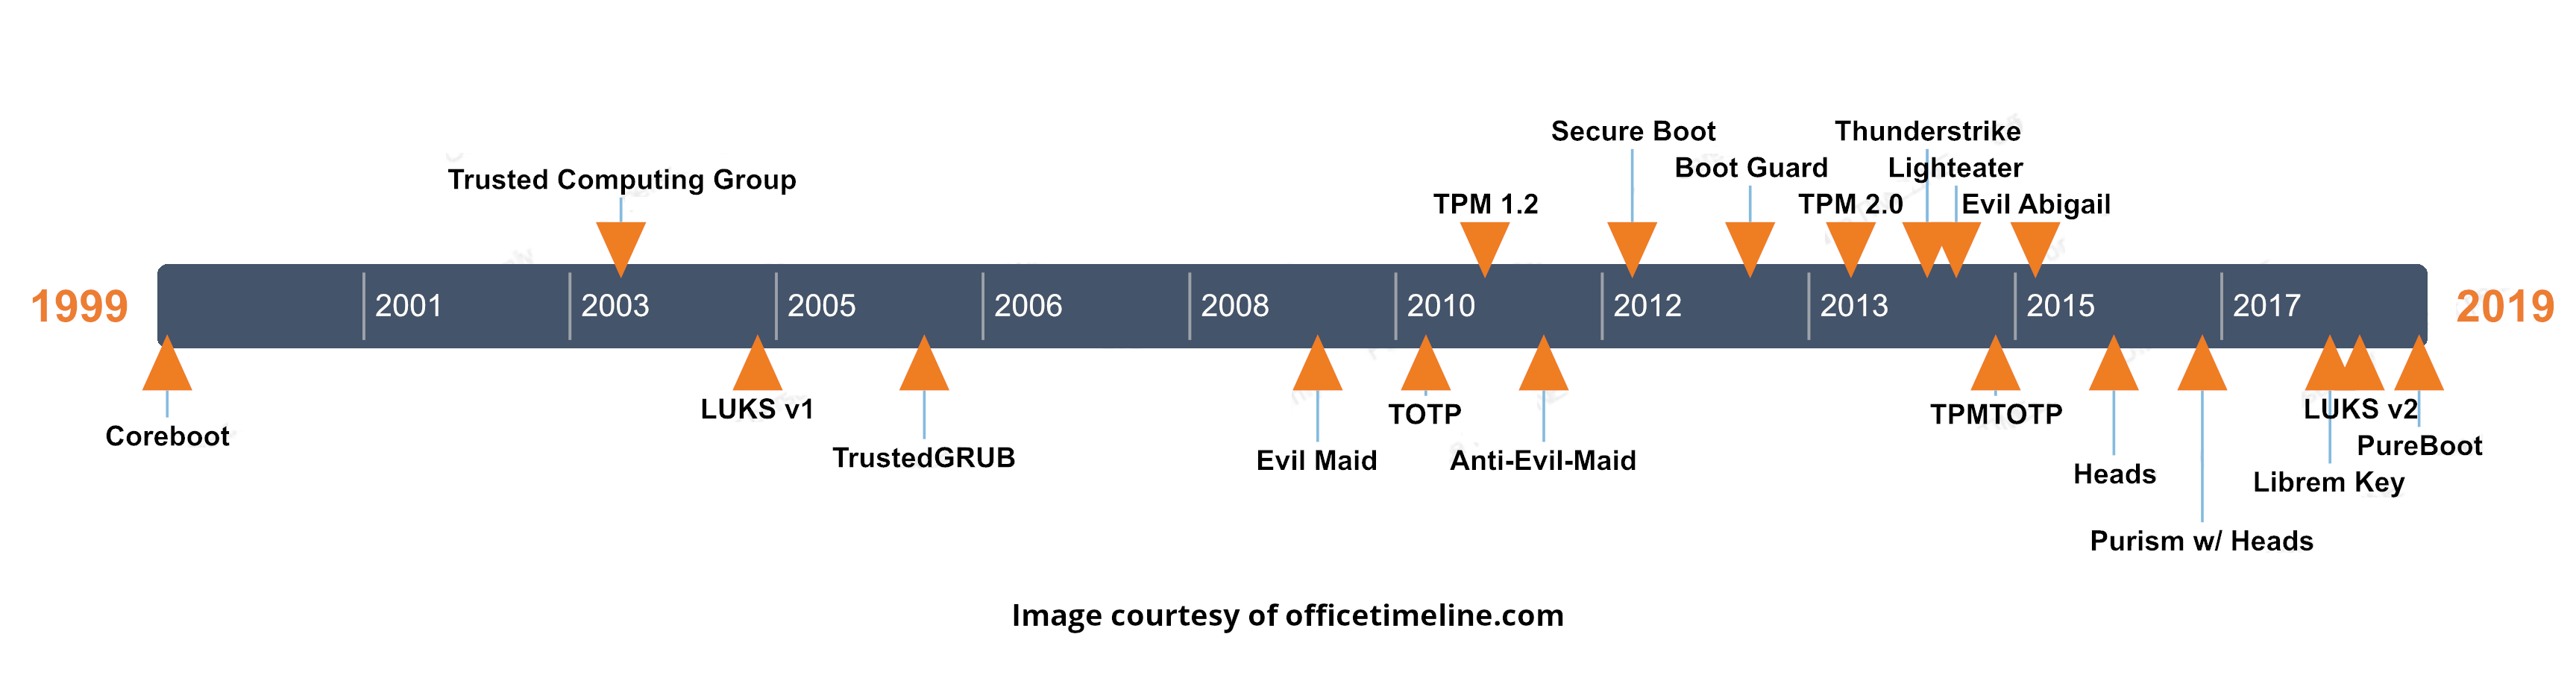 Visual timeline of the technology developed from 1999 (Coreboot) to 2019 (PureBoot)